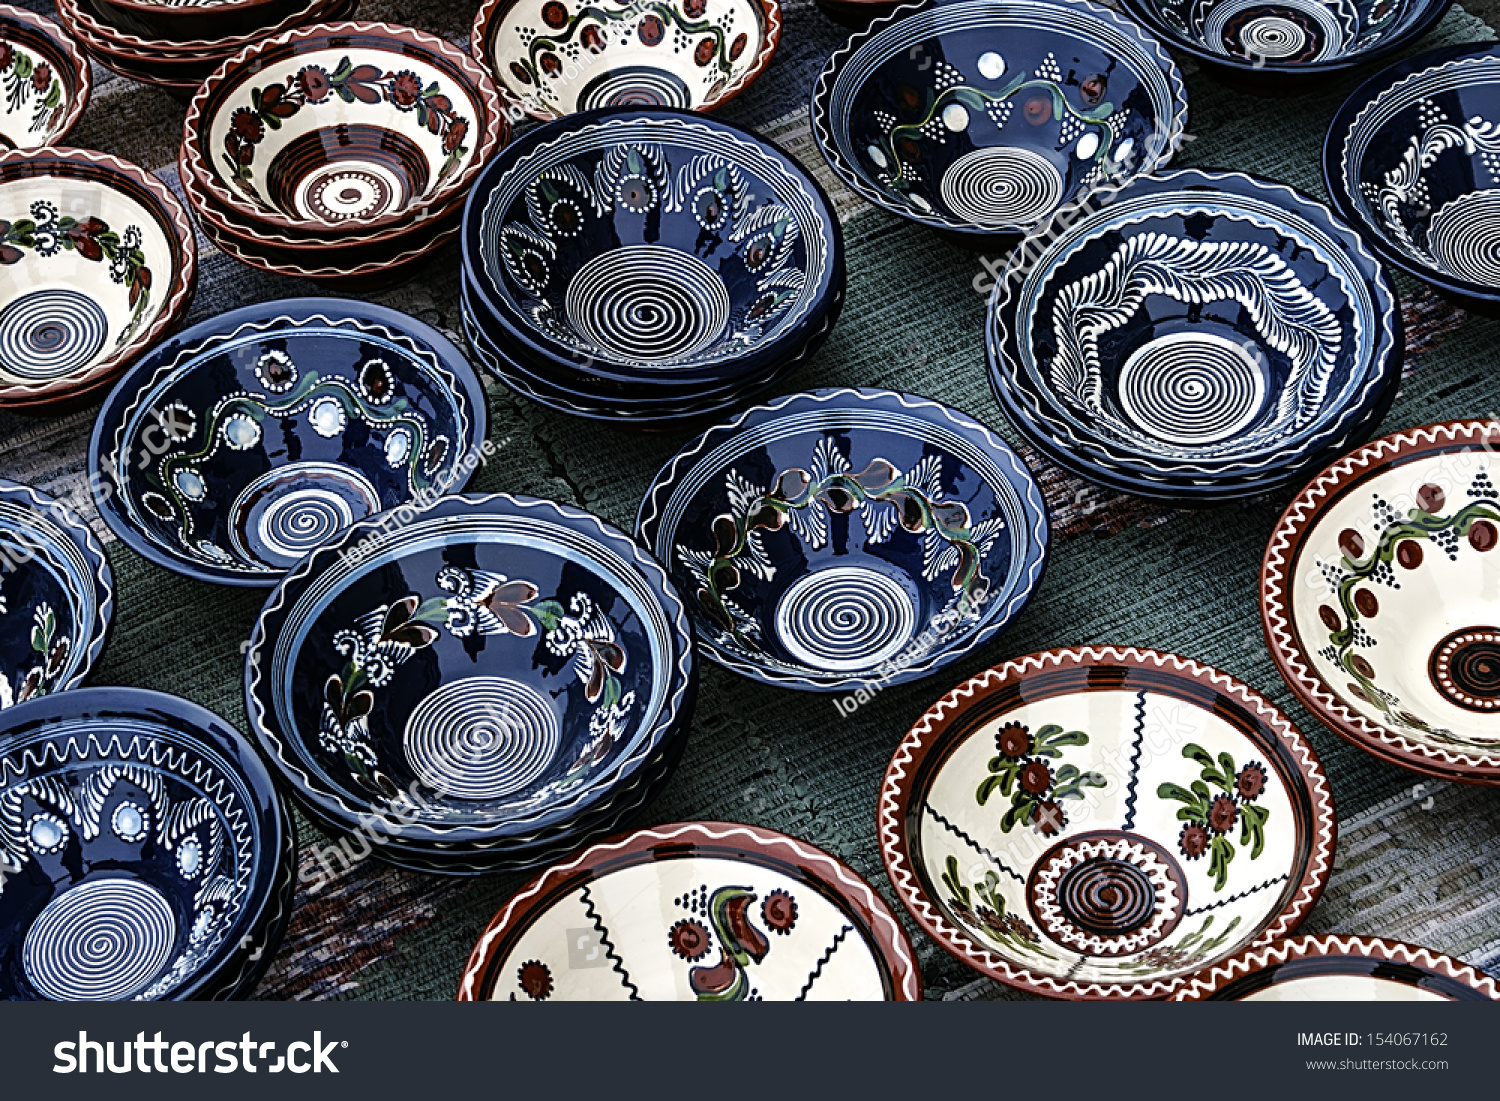 suicide for example Dust Romanian Traditional Ceramic Bowls Form Painted Stock Photo 154067162 |  Shutterstock